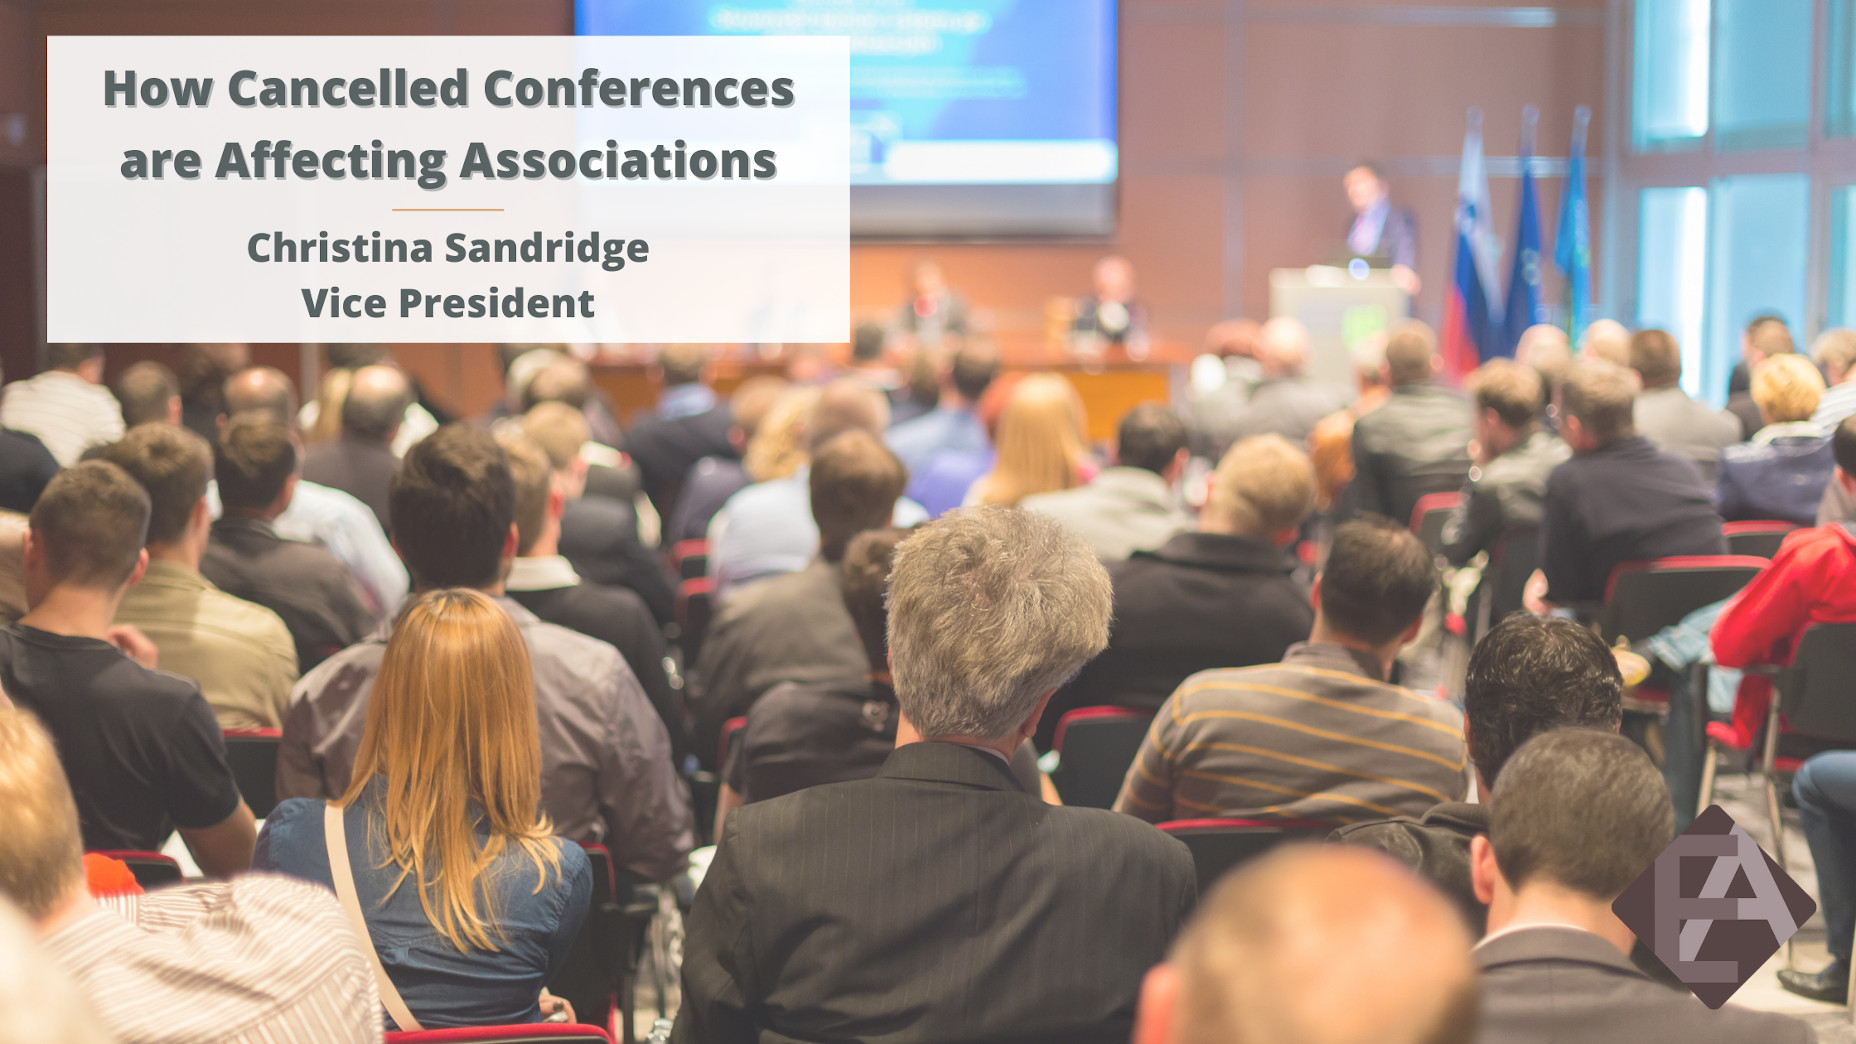 How Cancelled Conferences are Affecting Associations